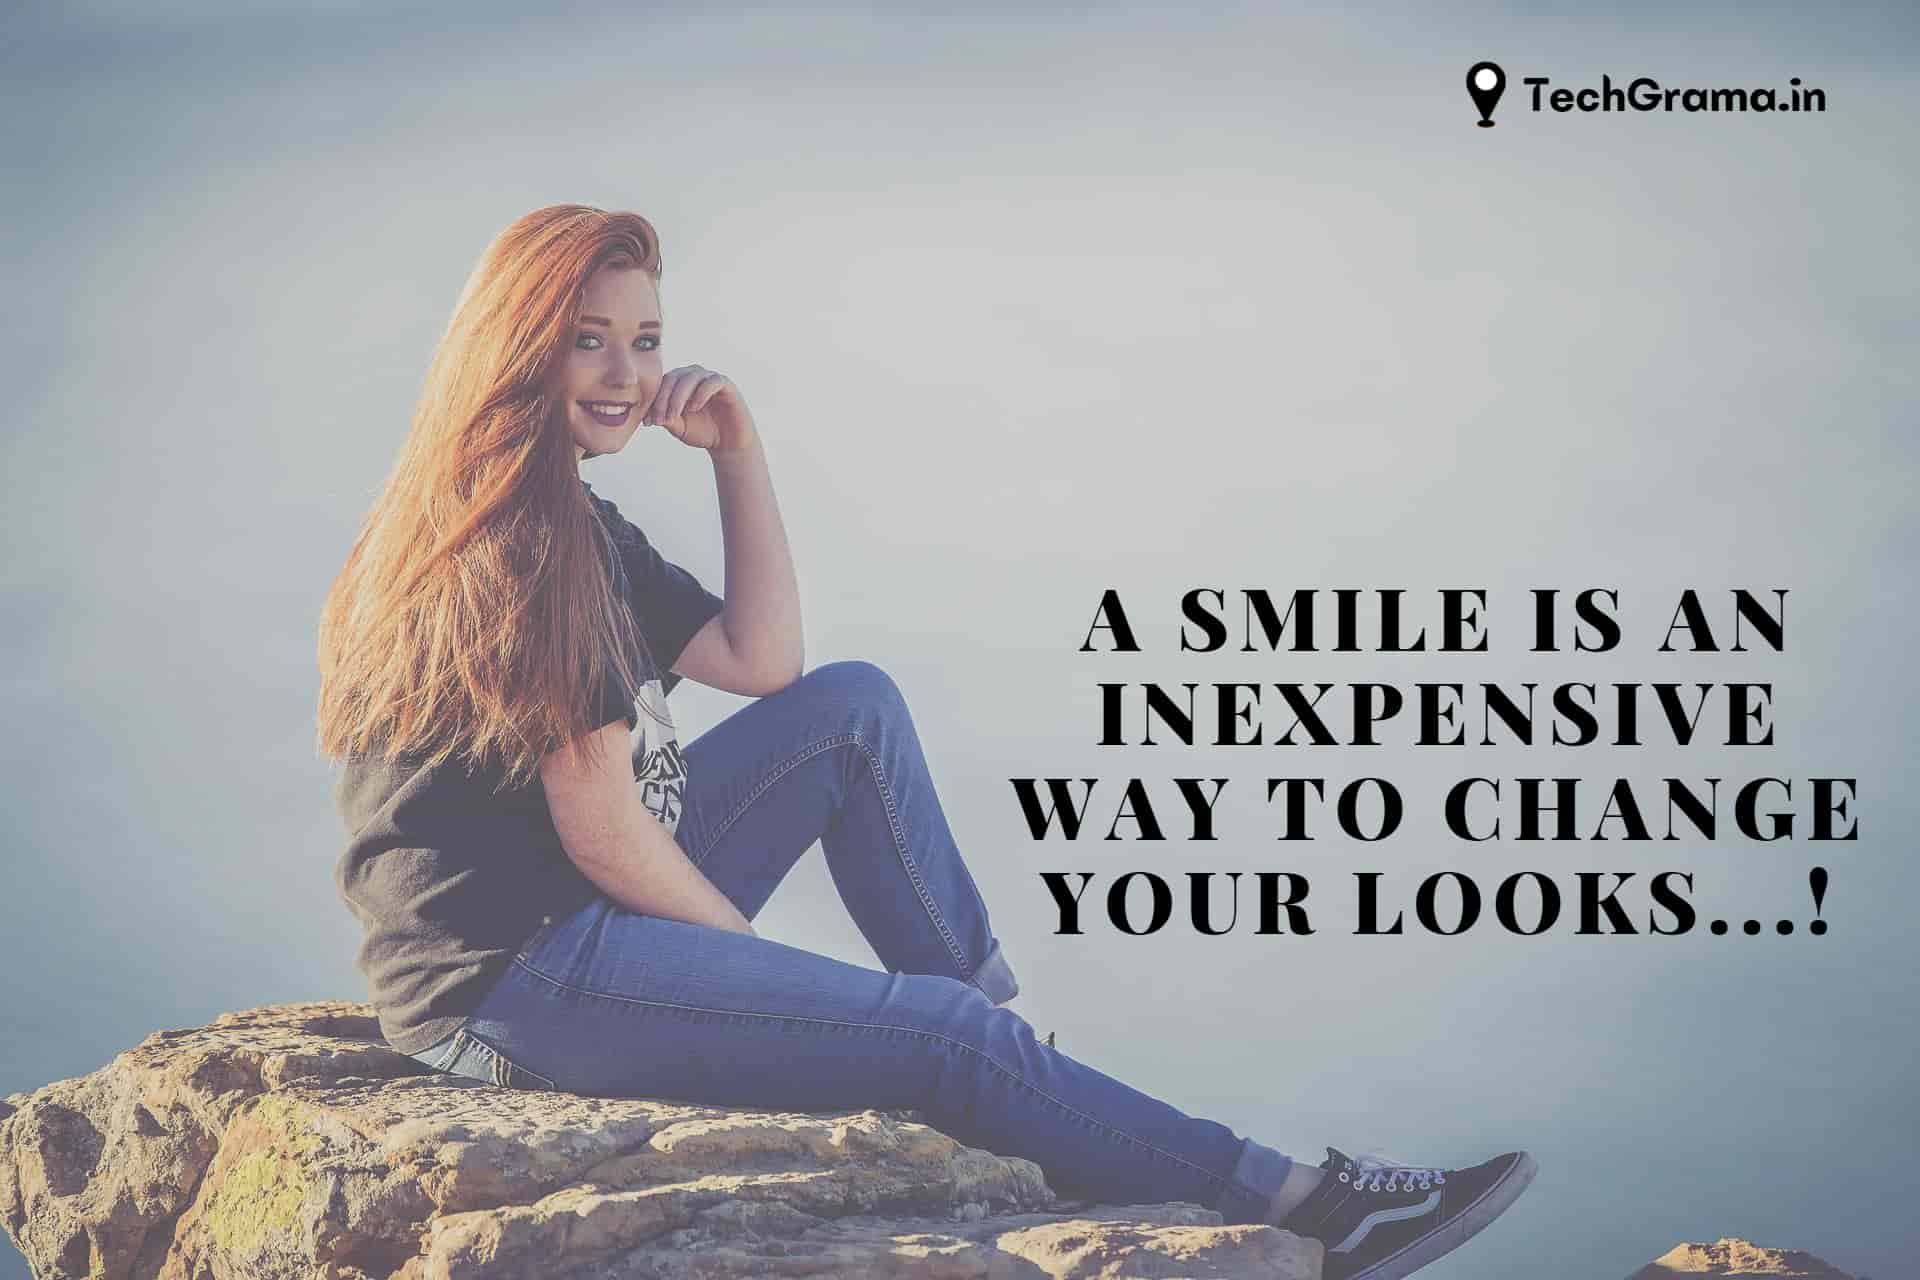 Best Smile Quotes For Girls, Instagram Quotes For Girls Smile, Savage Smile Quotes For Girls, Smile Quotes For Instagram For Girls, Beautiful Smile Quotes For Girls, Short Smile Quotes For Girls, Smile Quotes For Females, Quotes For Instagram Post For Girl Smile, Girl Smile Quotes For Instagram.